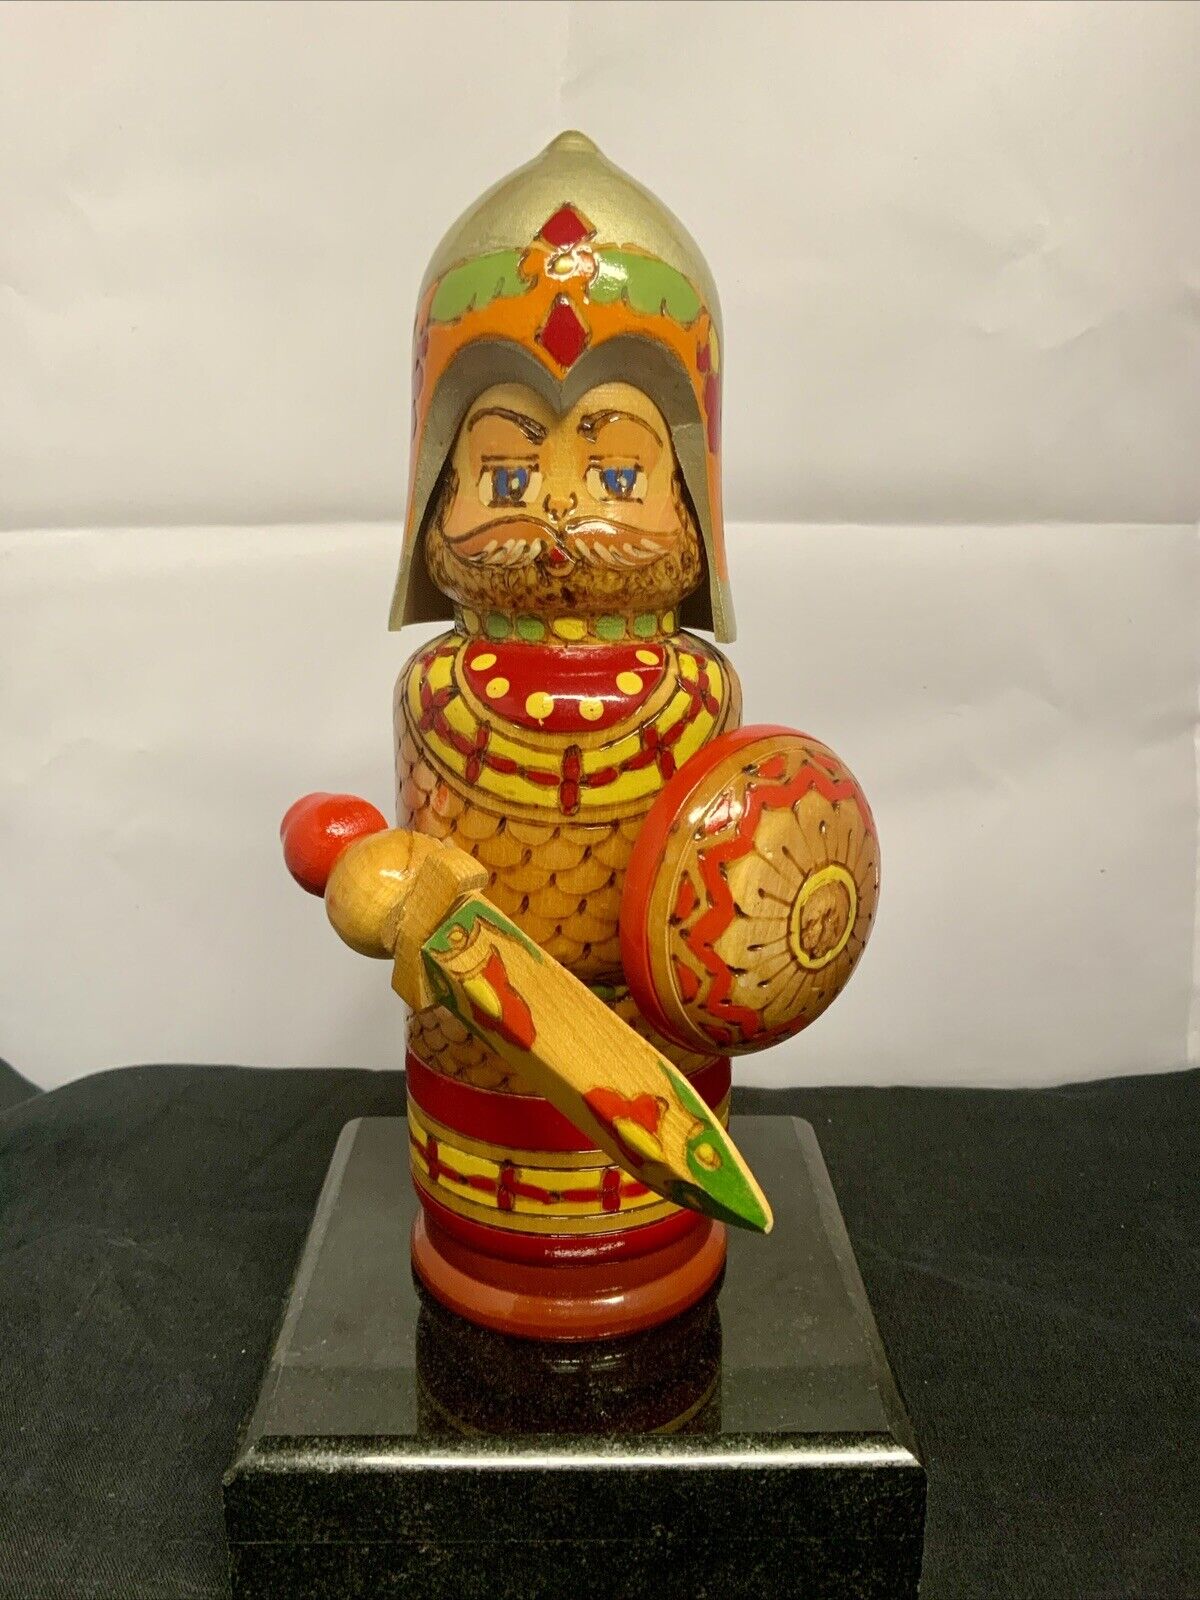 Unique Russian Handmade / Painted Viking Bottle Holder 9” Tall